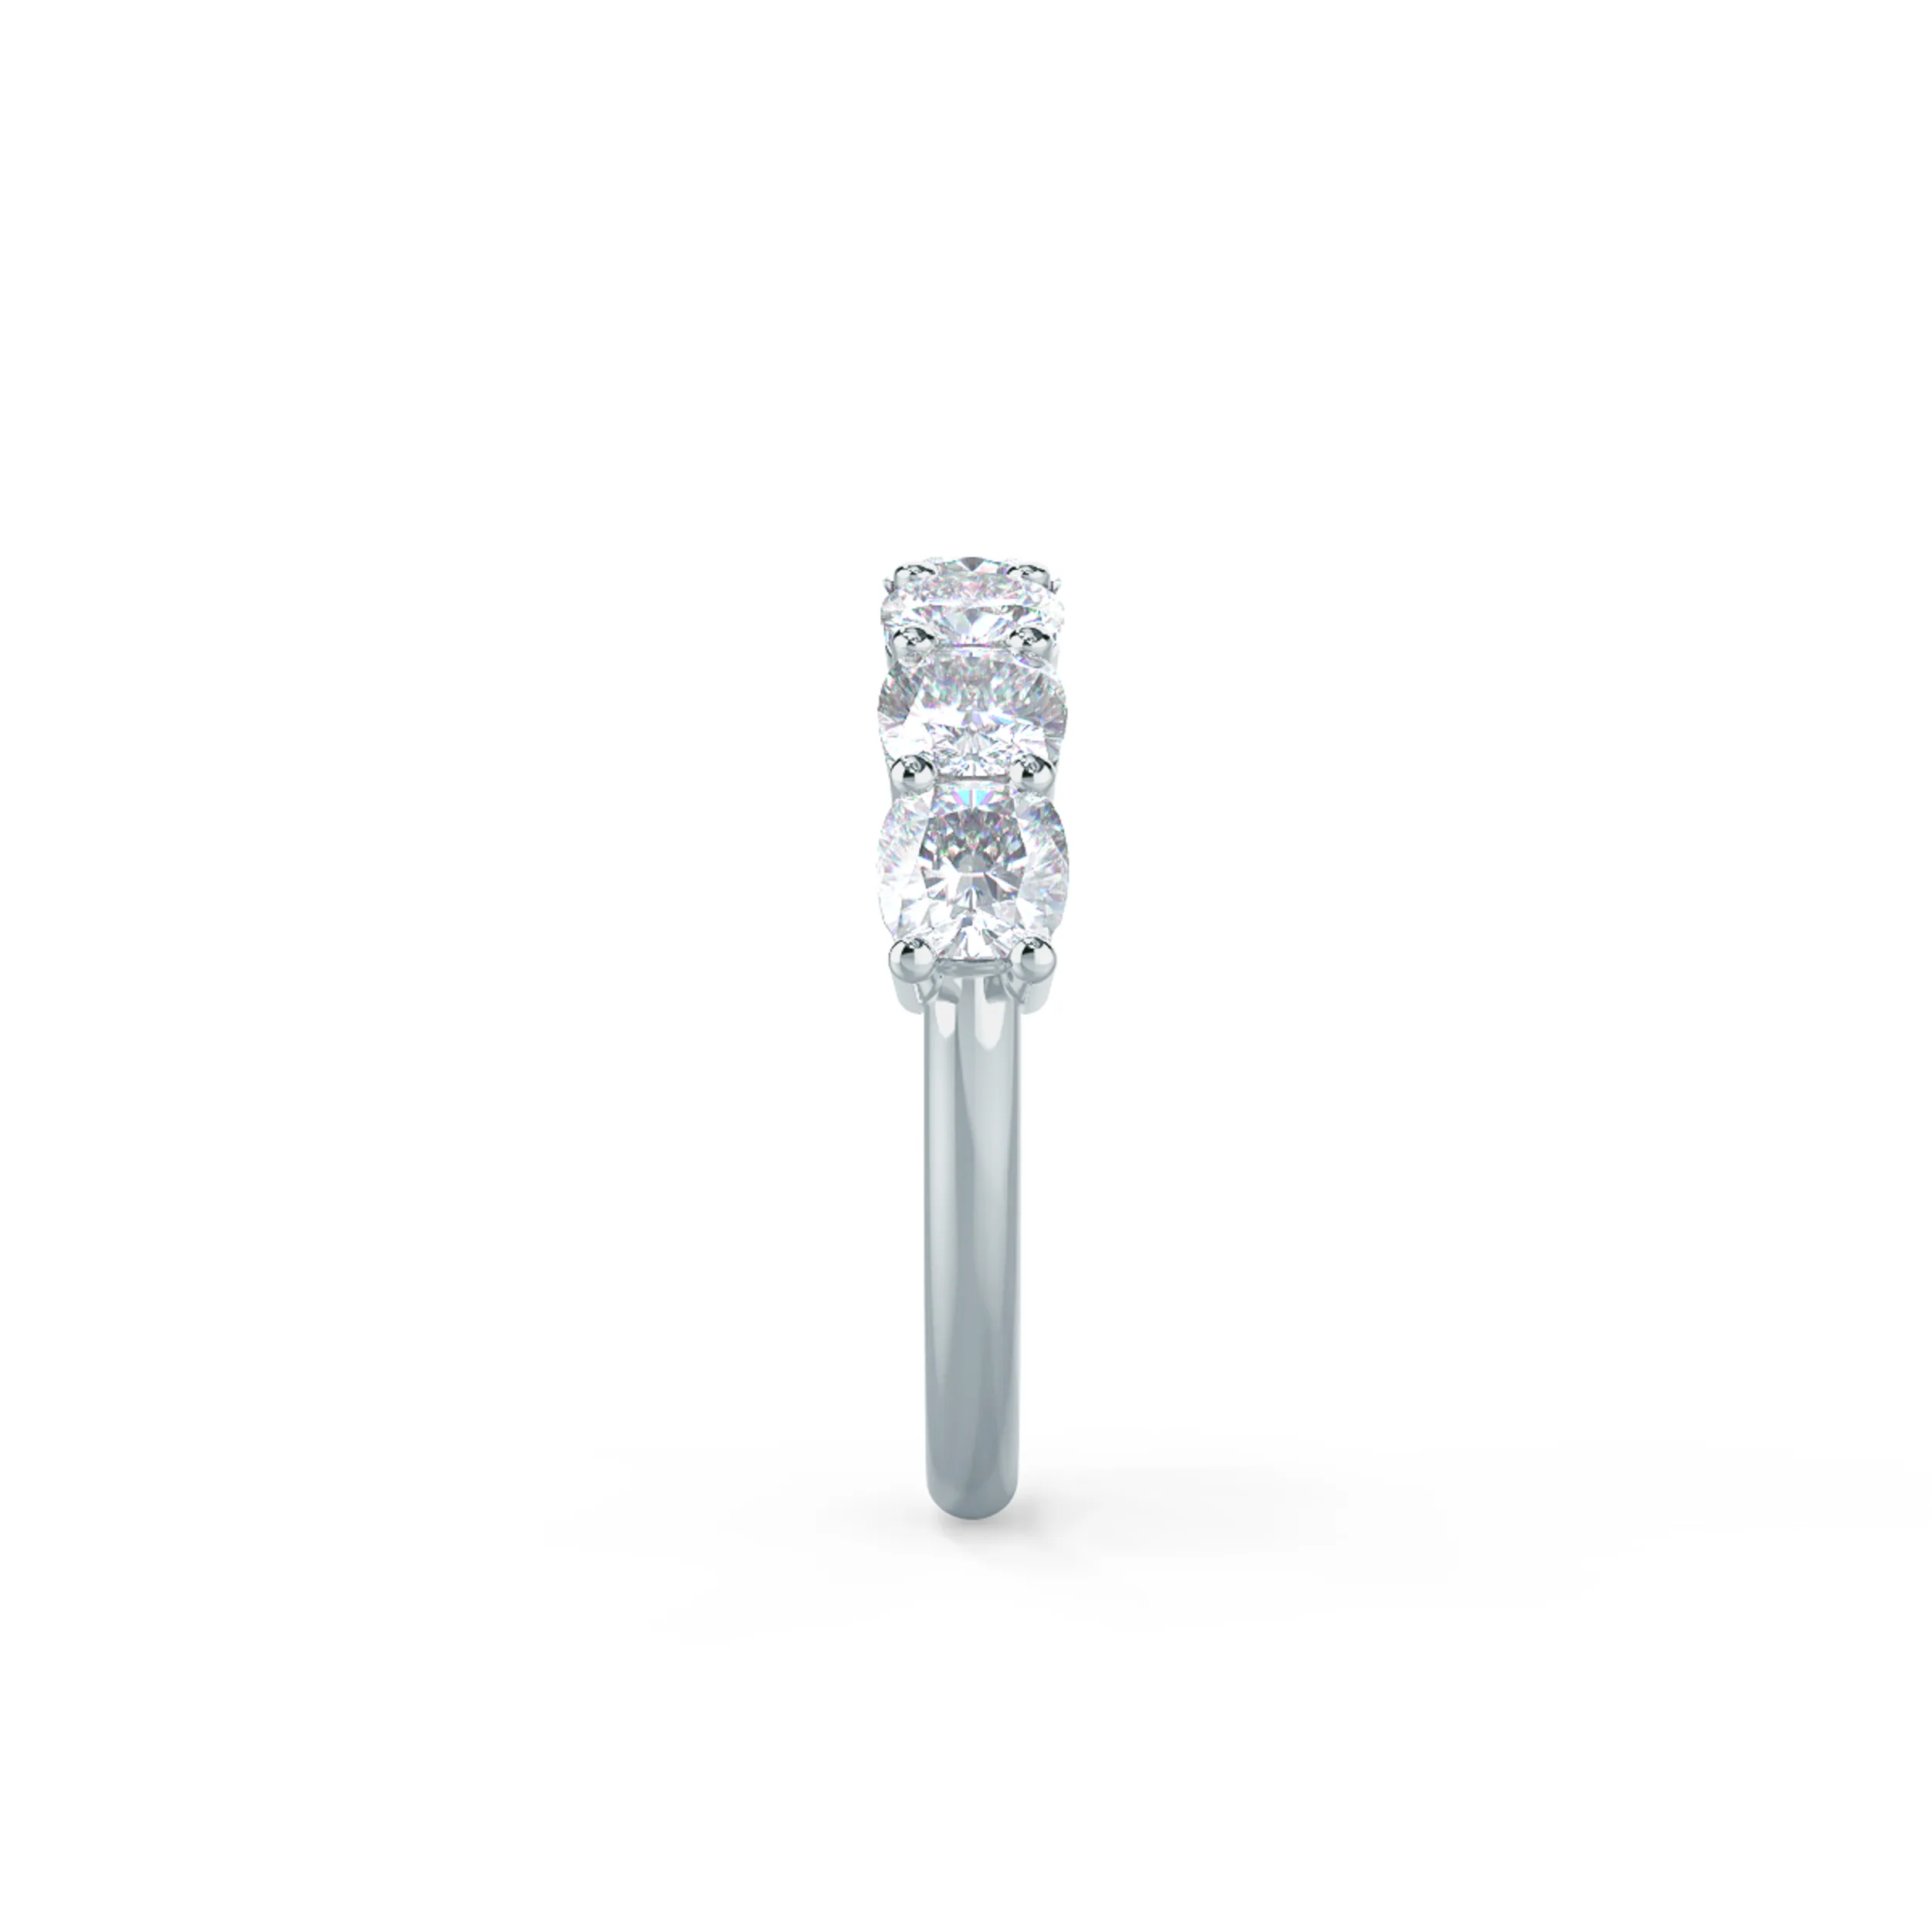 2.8 ct Lab Diamonds set in 18k White Gold Cushion Seven Stone (Side View)